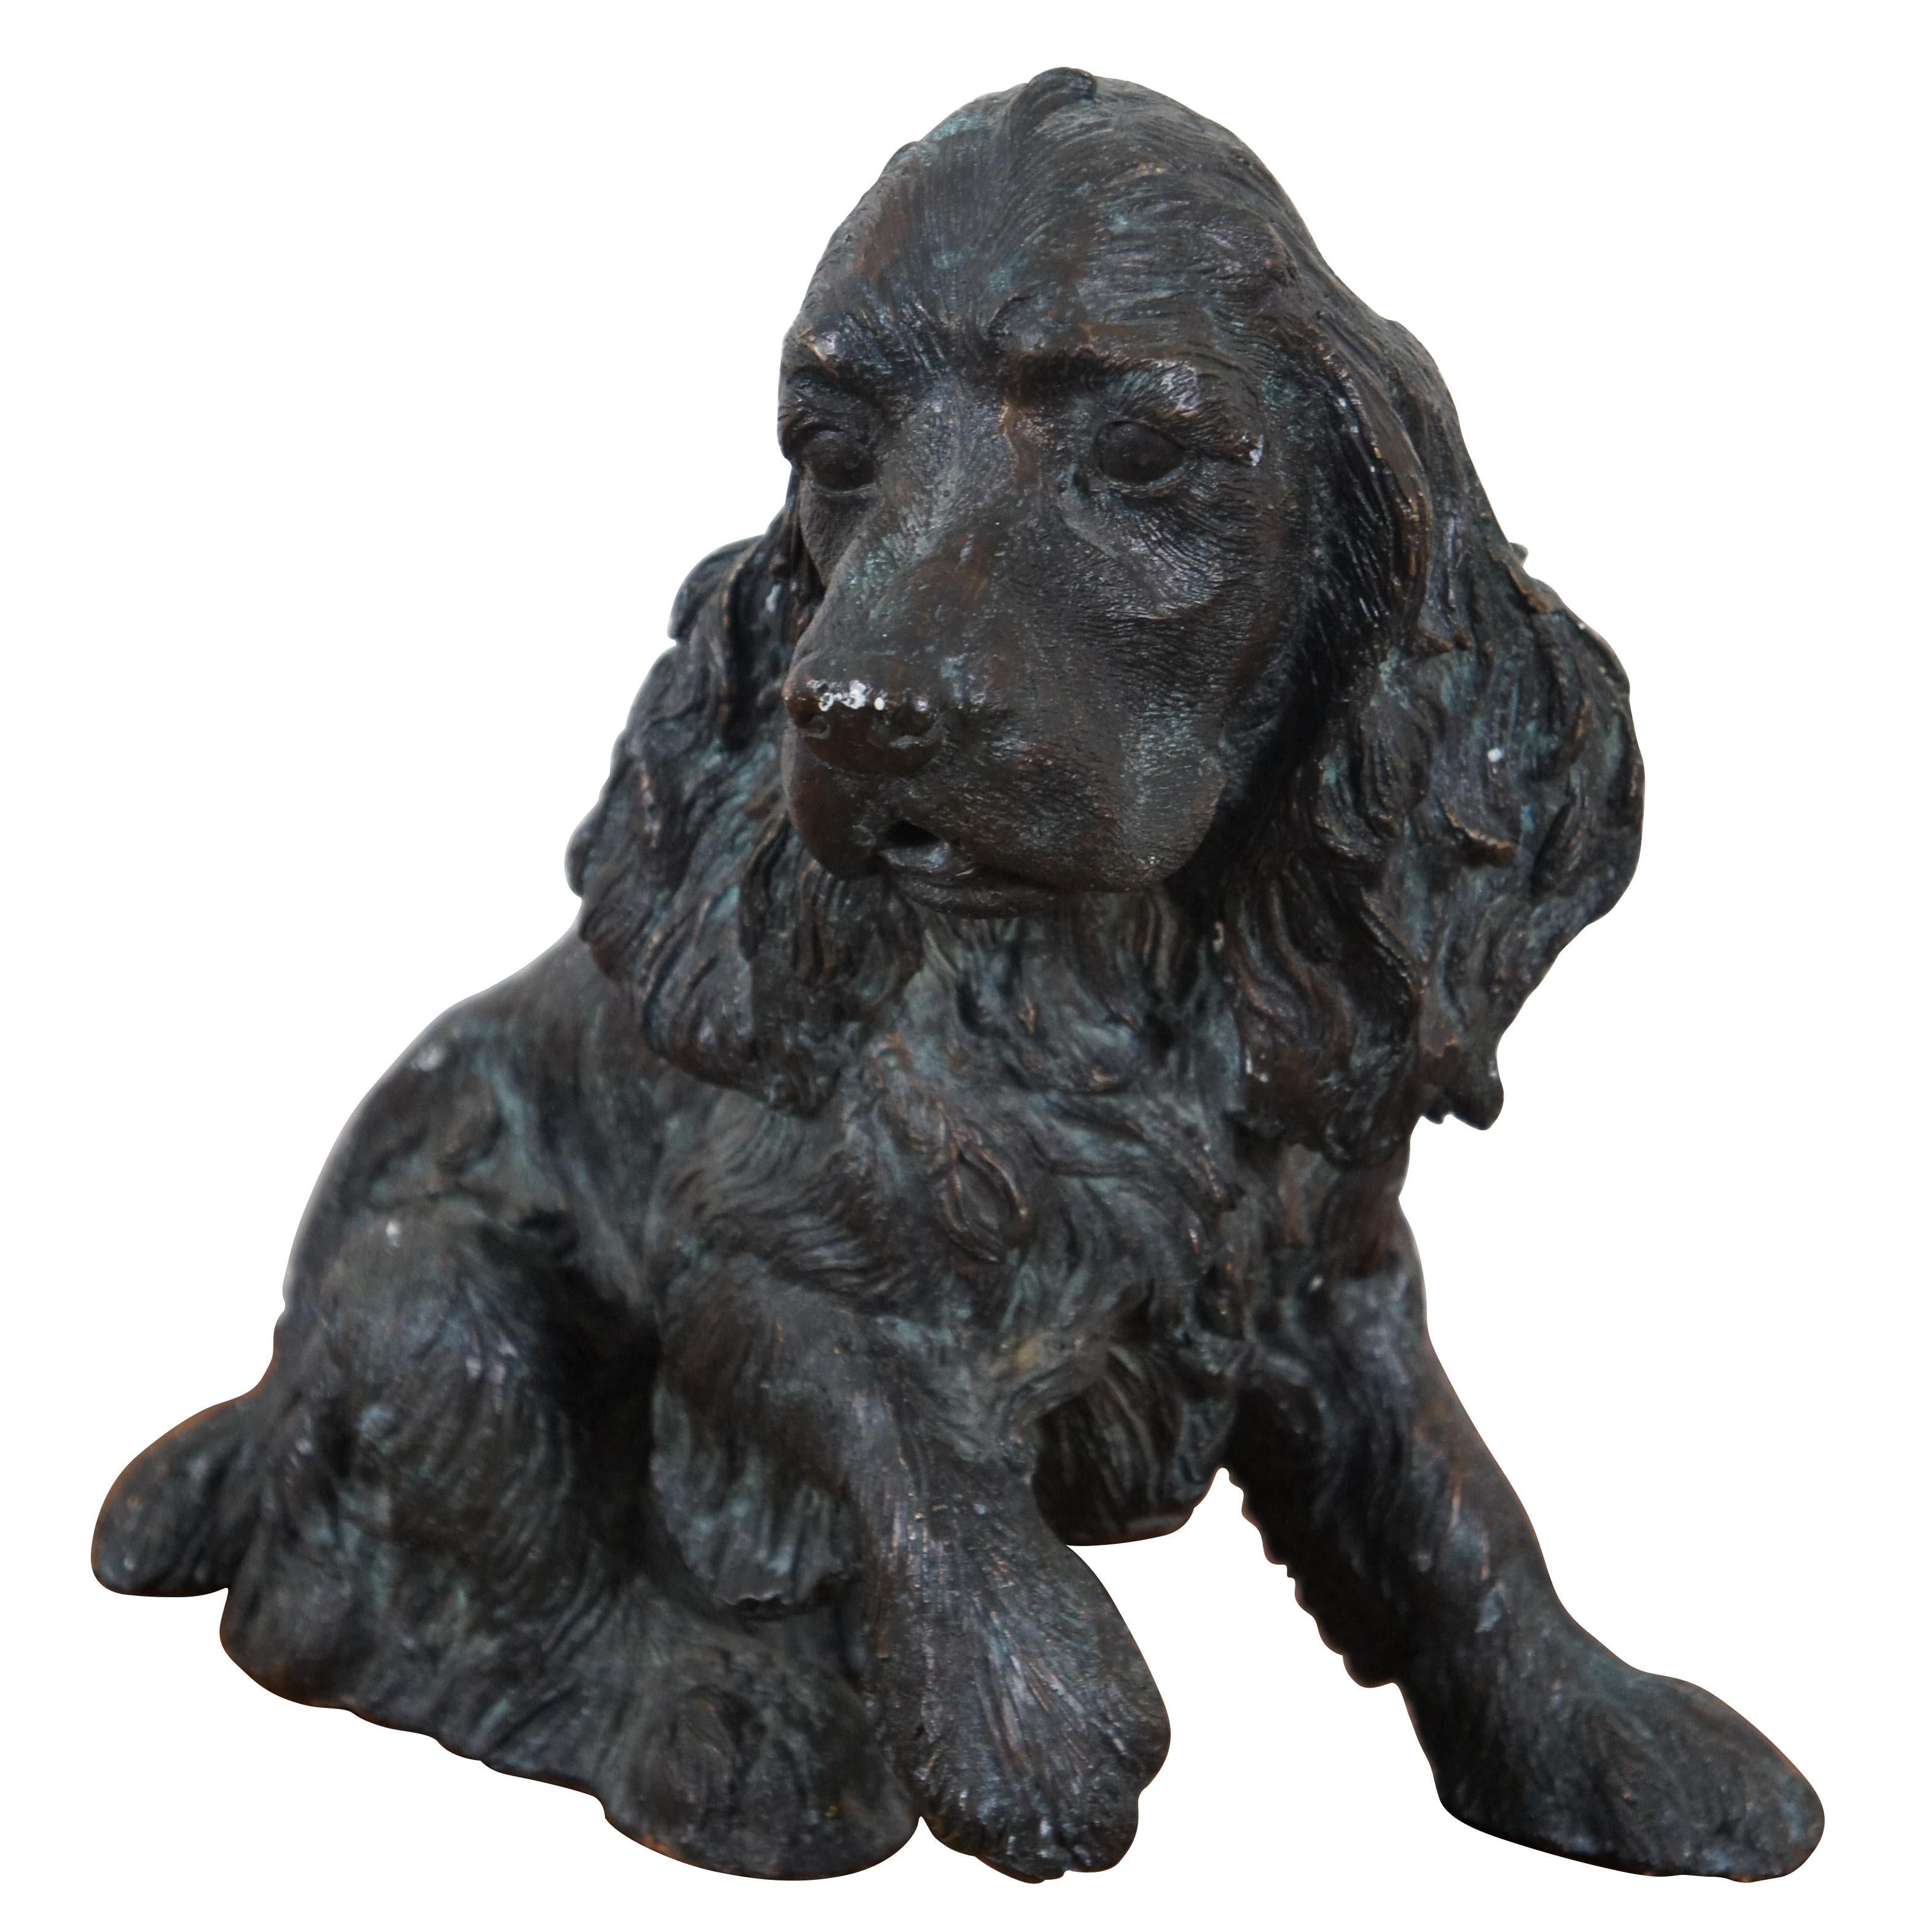 Finely detailed vintage bronze sculpture / statuette of a seated Cocker Spaniel or Irish Setter with one paw raised.